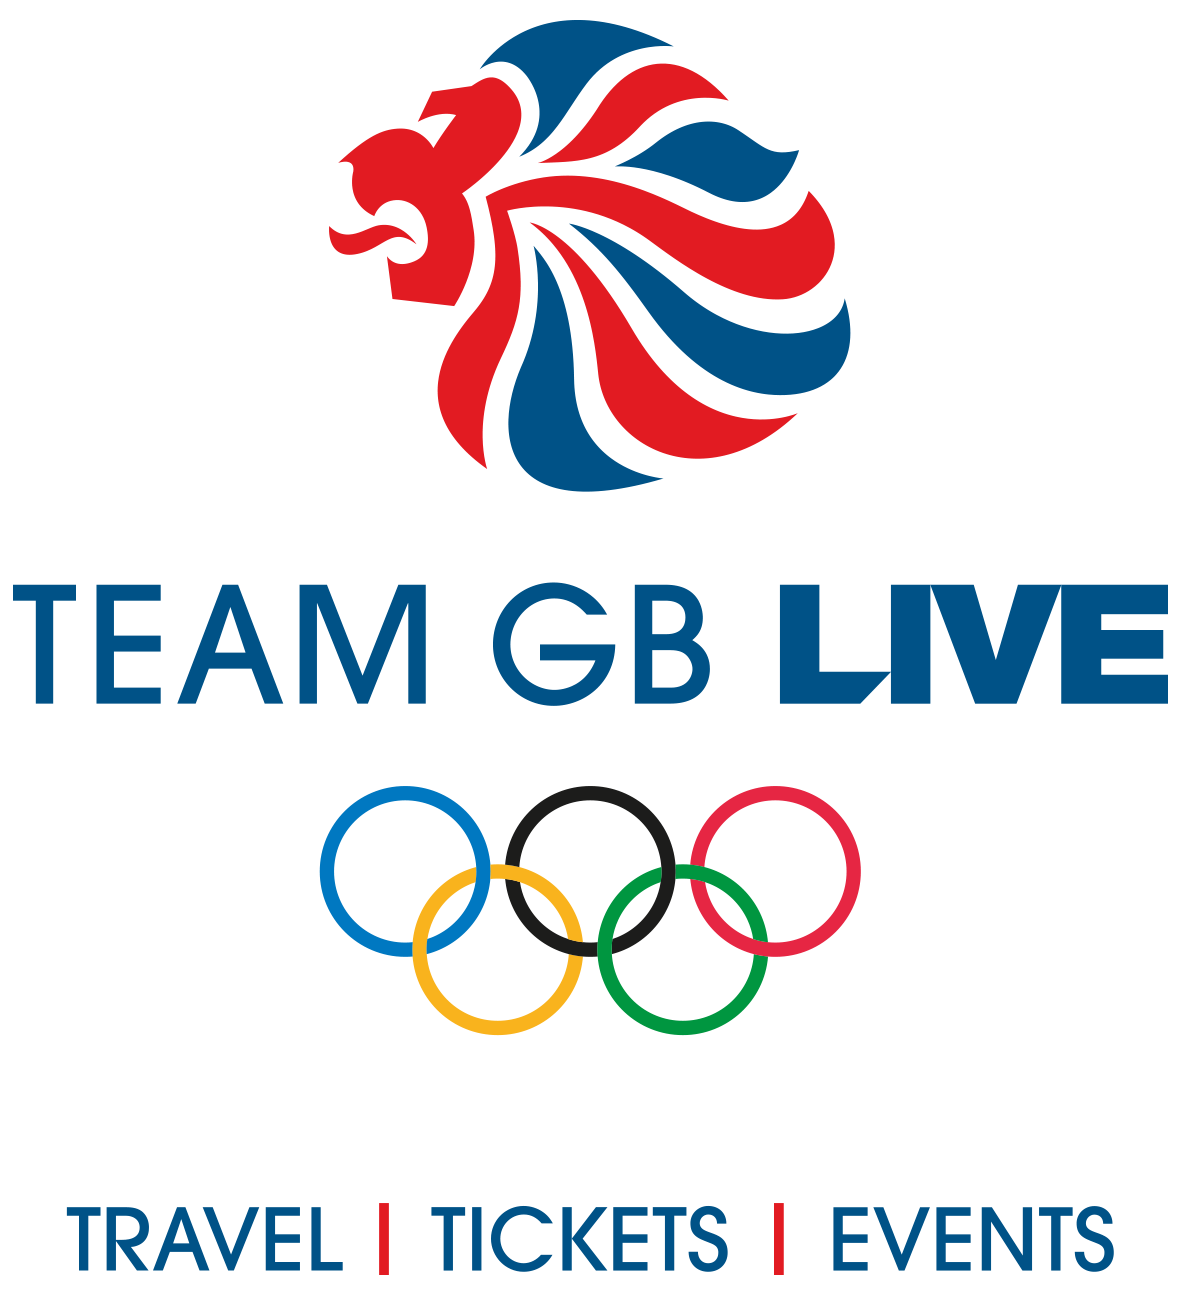 British authorised ticket reseller for Tokyo 2020 offers refunds on travel packages after postponement